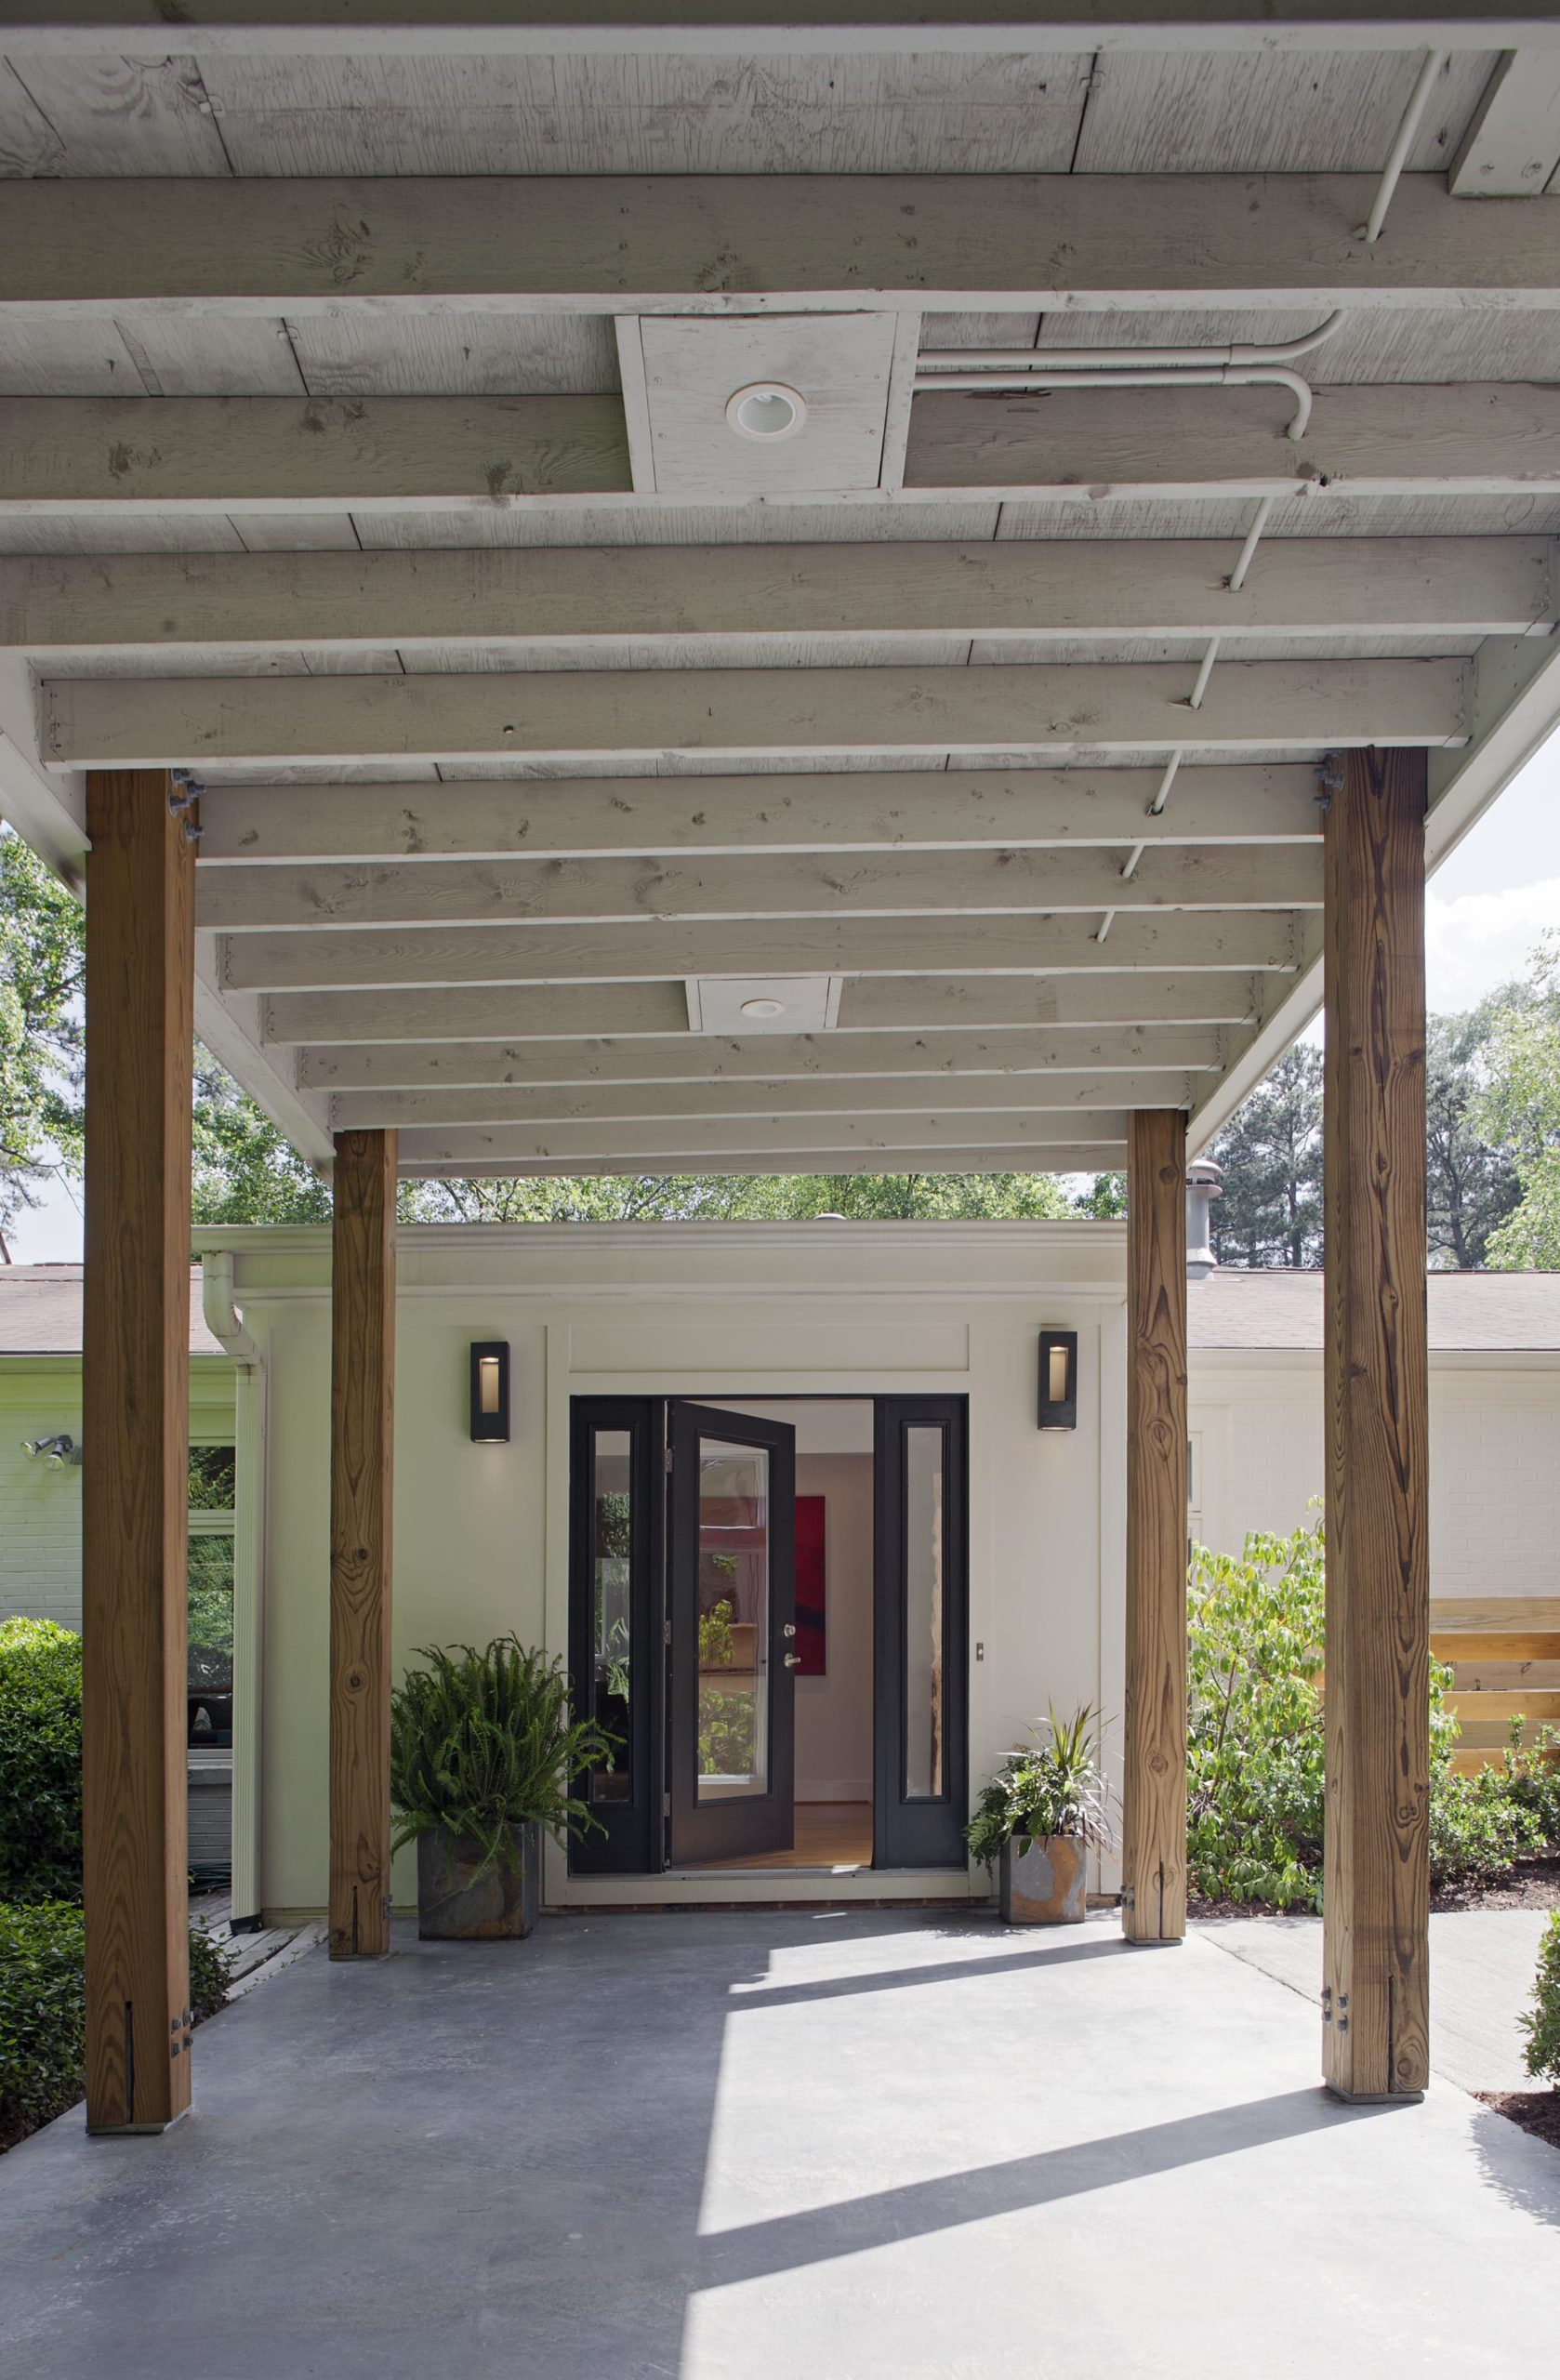 Colonnade covered walkway from car port to house entrance